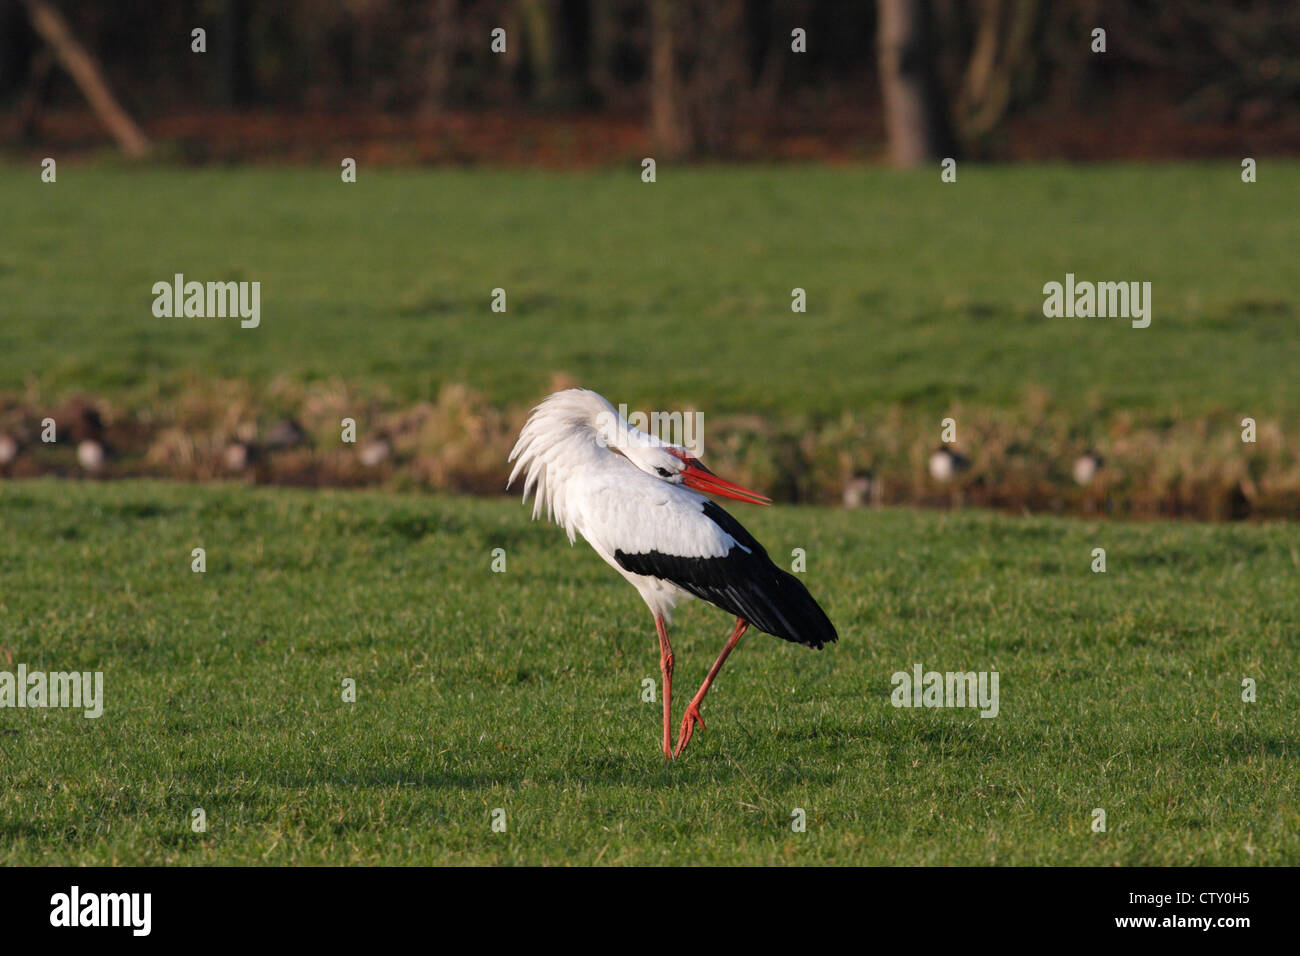 White Stork (Ciconia Ciconia) displaying/bill-clattering in a field, The Hague, Netherlands Stock Photo